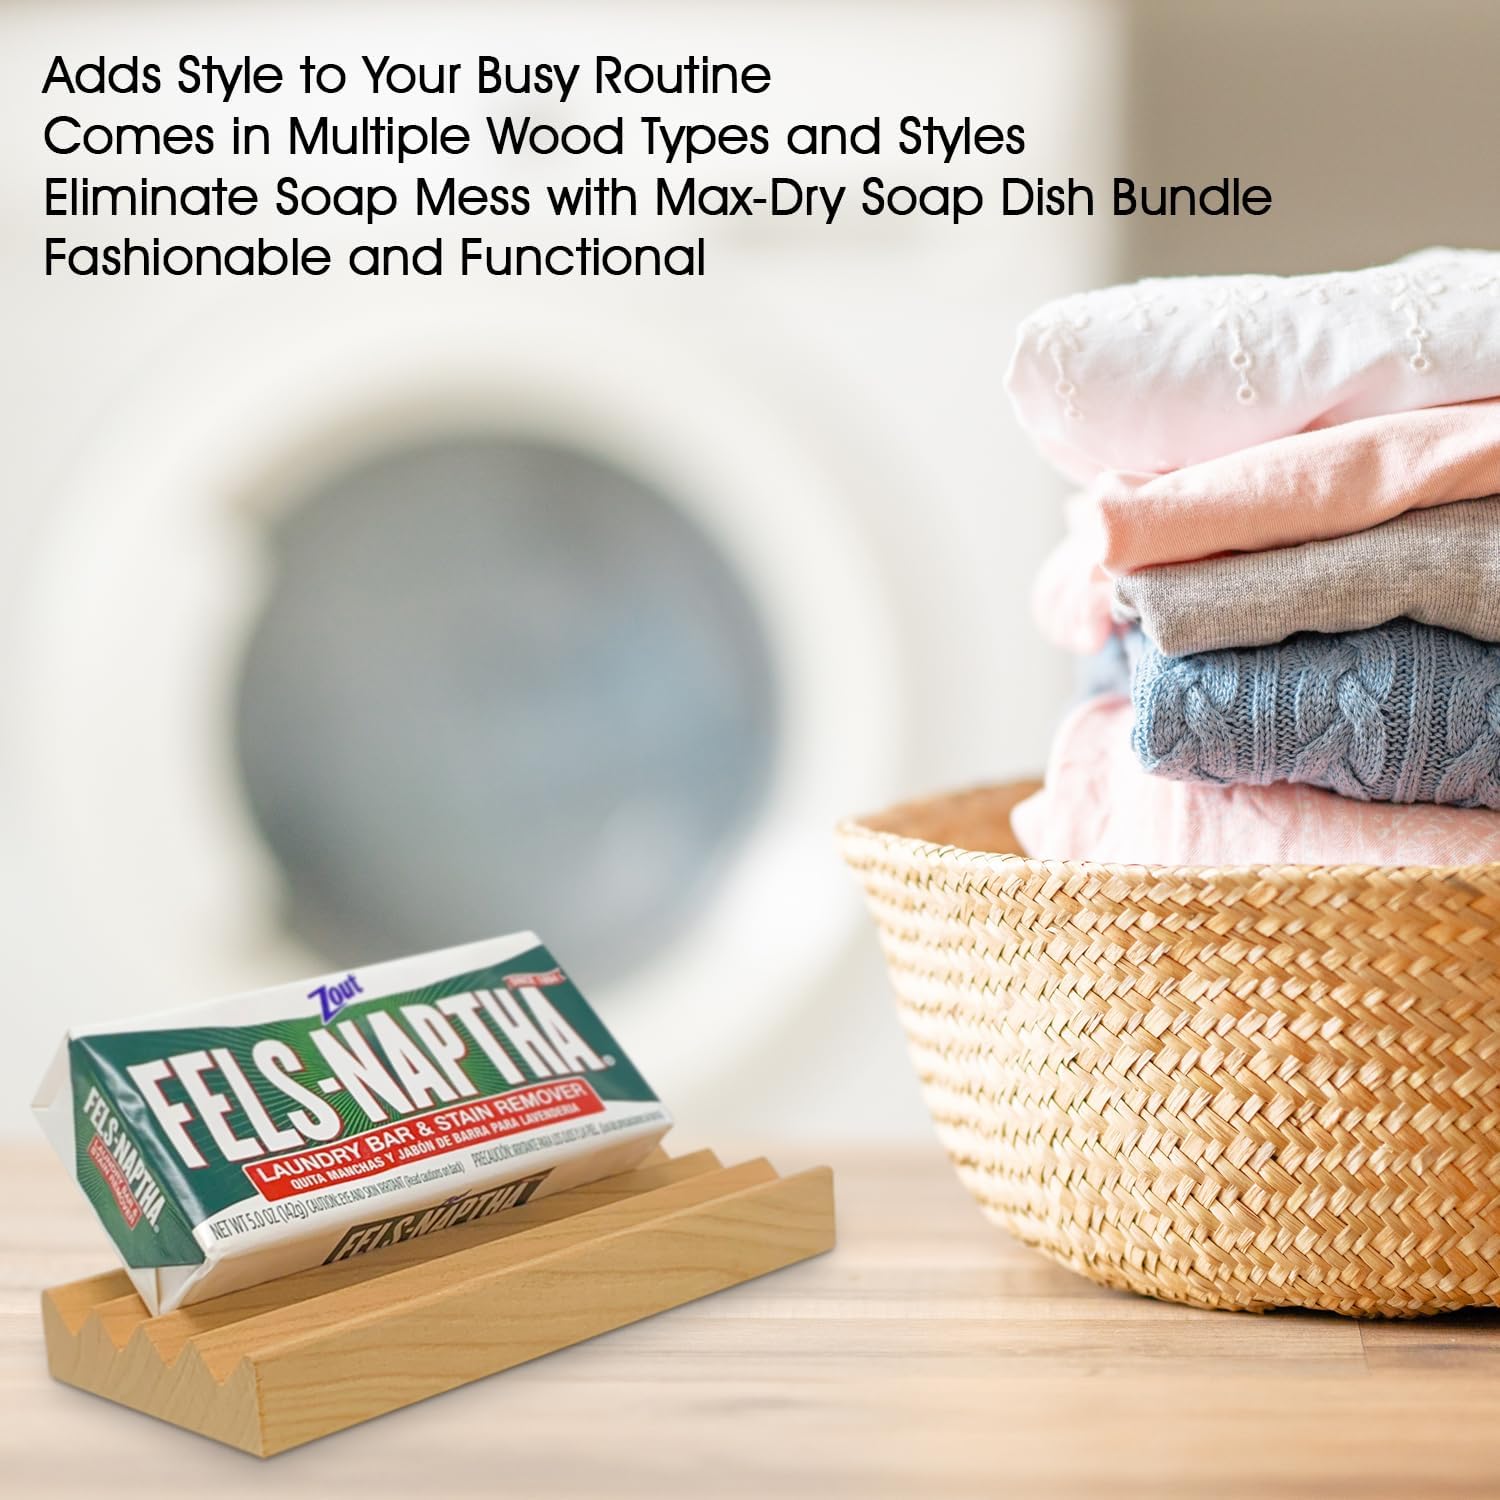 Fels Naptha Laundry Detergent Bar - 5 Ounce Fels Naptha Laundry Bar Soap and Stain Remover Bundle (Boardwalk Style) - Get the Ultimate Accessory to your Fels Naptha Soap Bars. : Health & Household